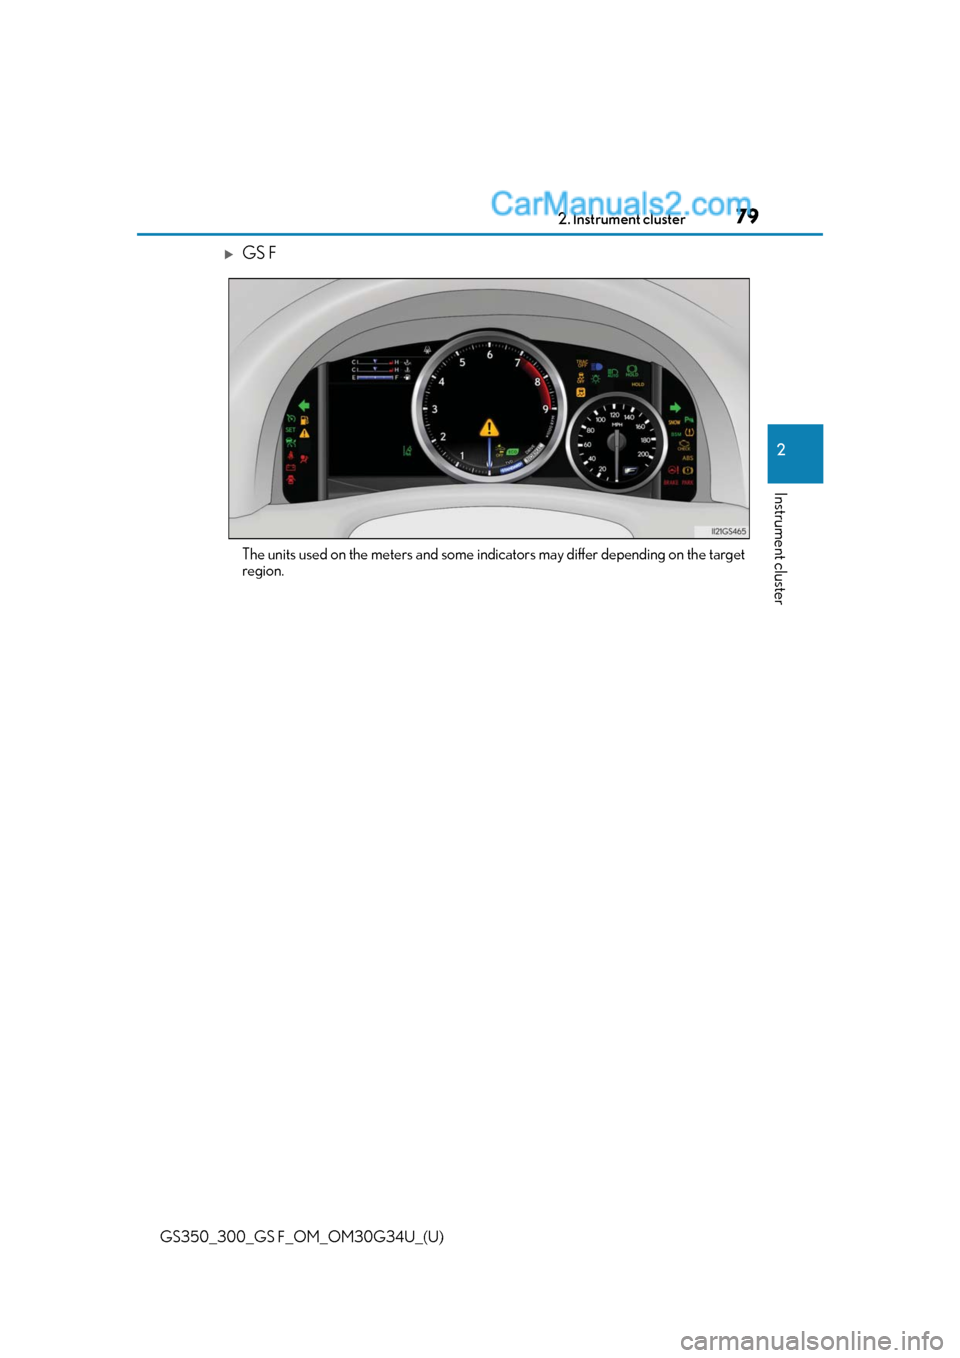 Lexus GS300 2018  Owners Manuals GS350_300_GS F_OM_OM30G34U_(U)
792. Instrument cluster
2
Instrument cluster
GS F
The units used on the meters and some indicators may differ depending on the target
region.  